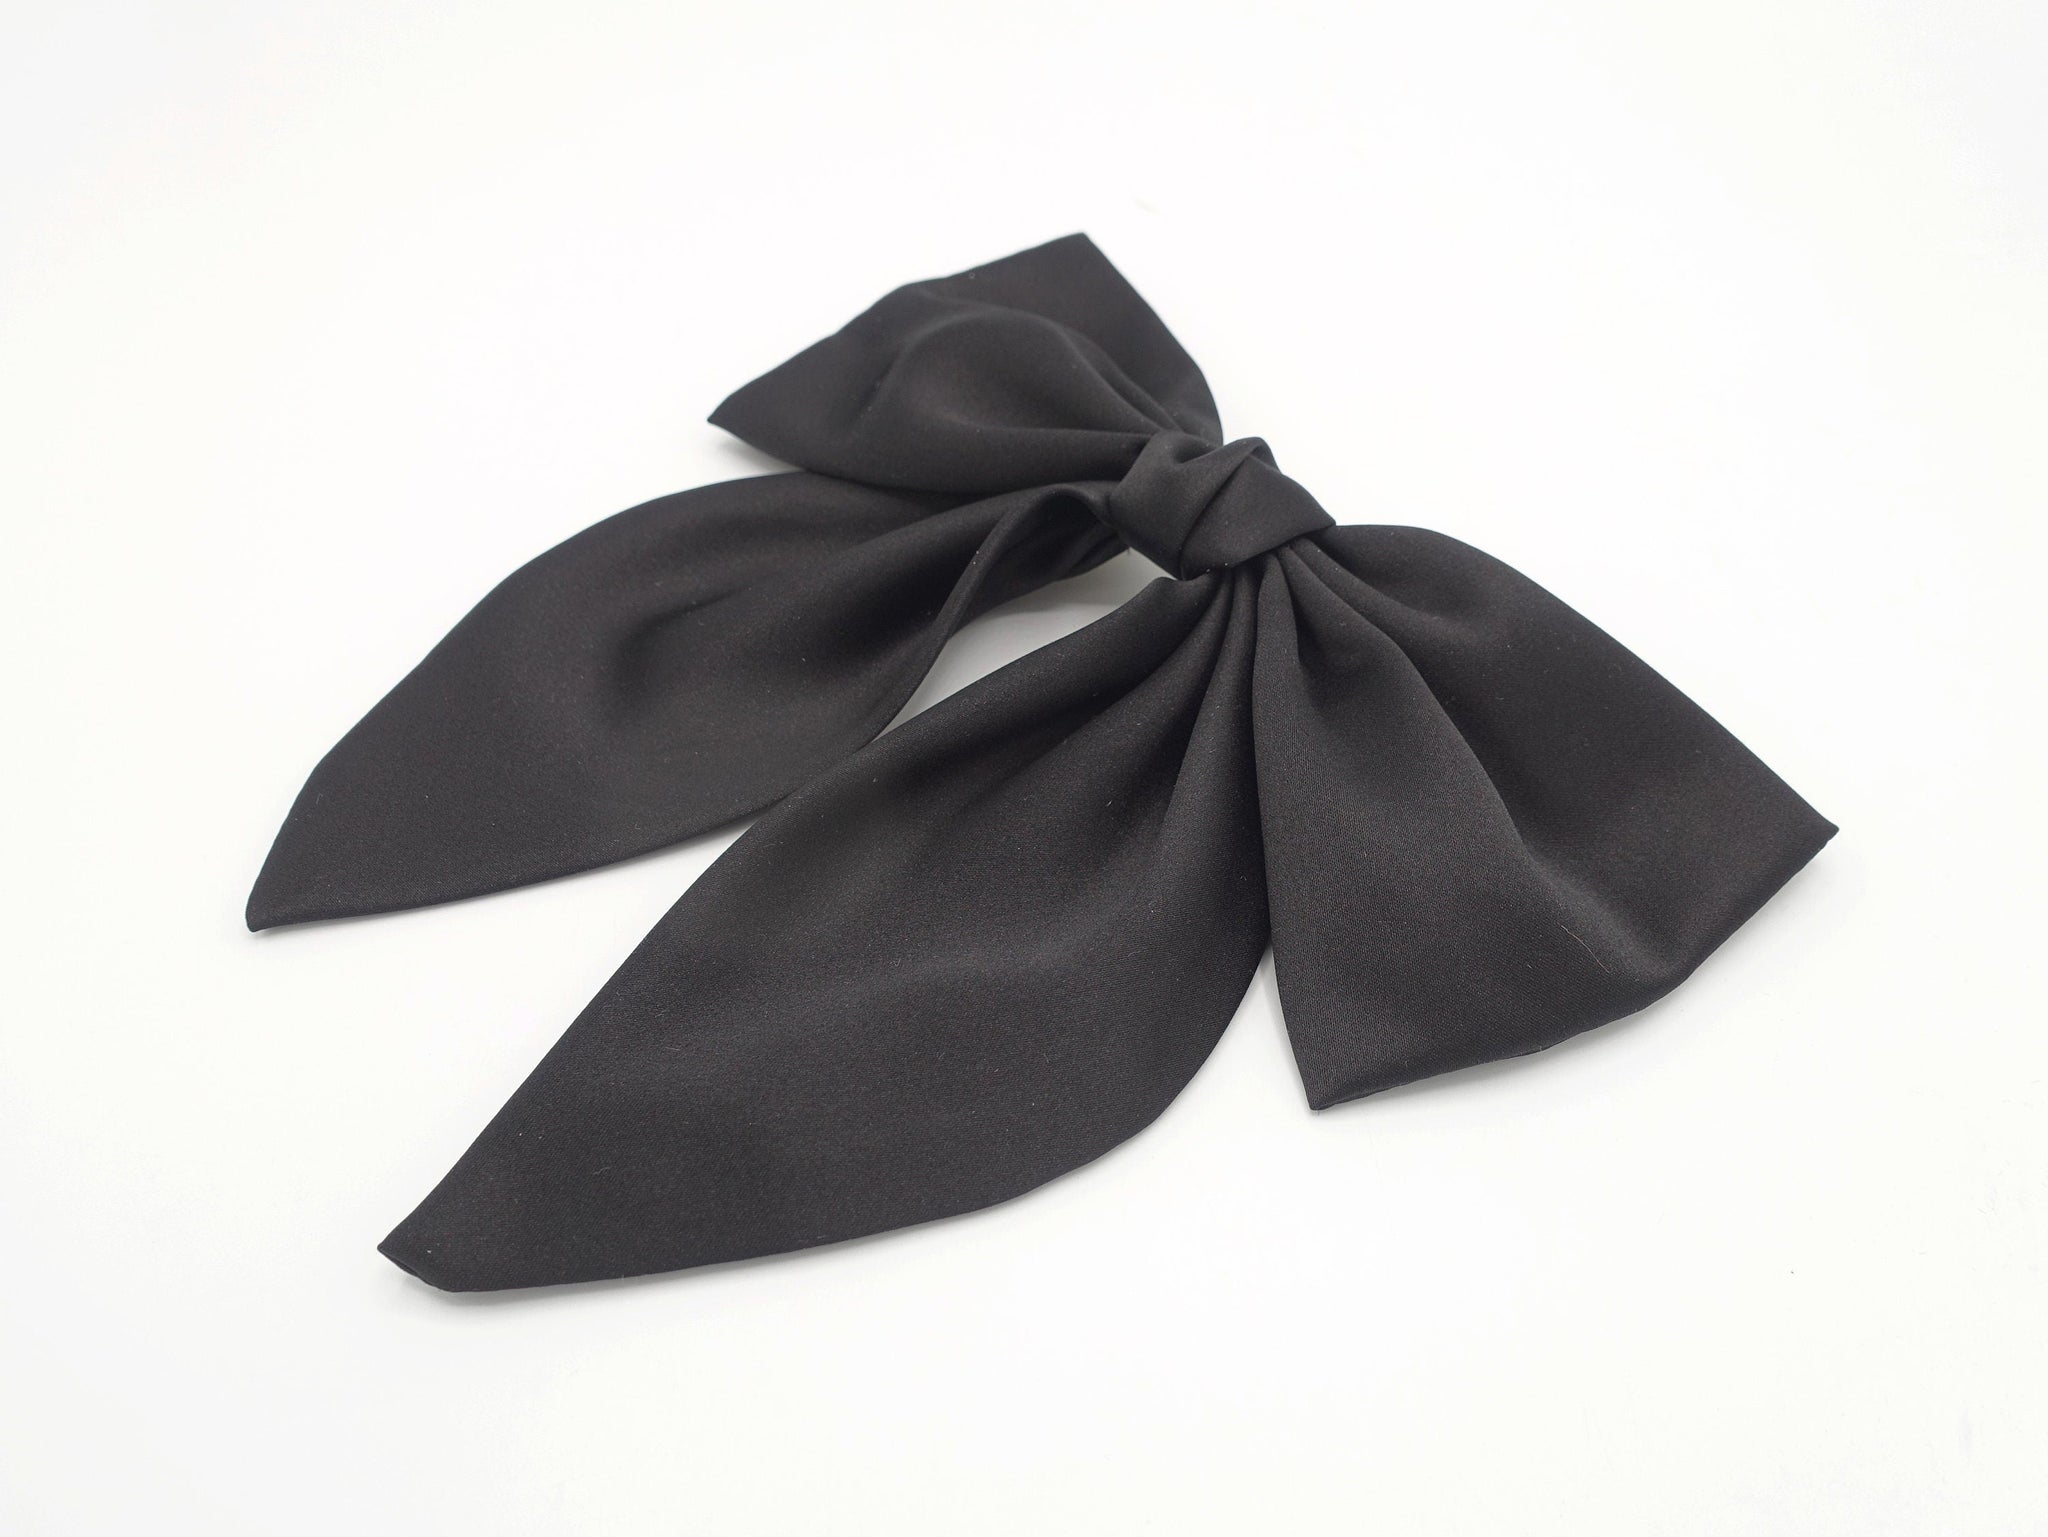 veryshine.com satin hair bow regular size pointed tail glossy hair accessory for women